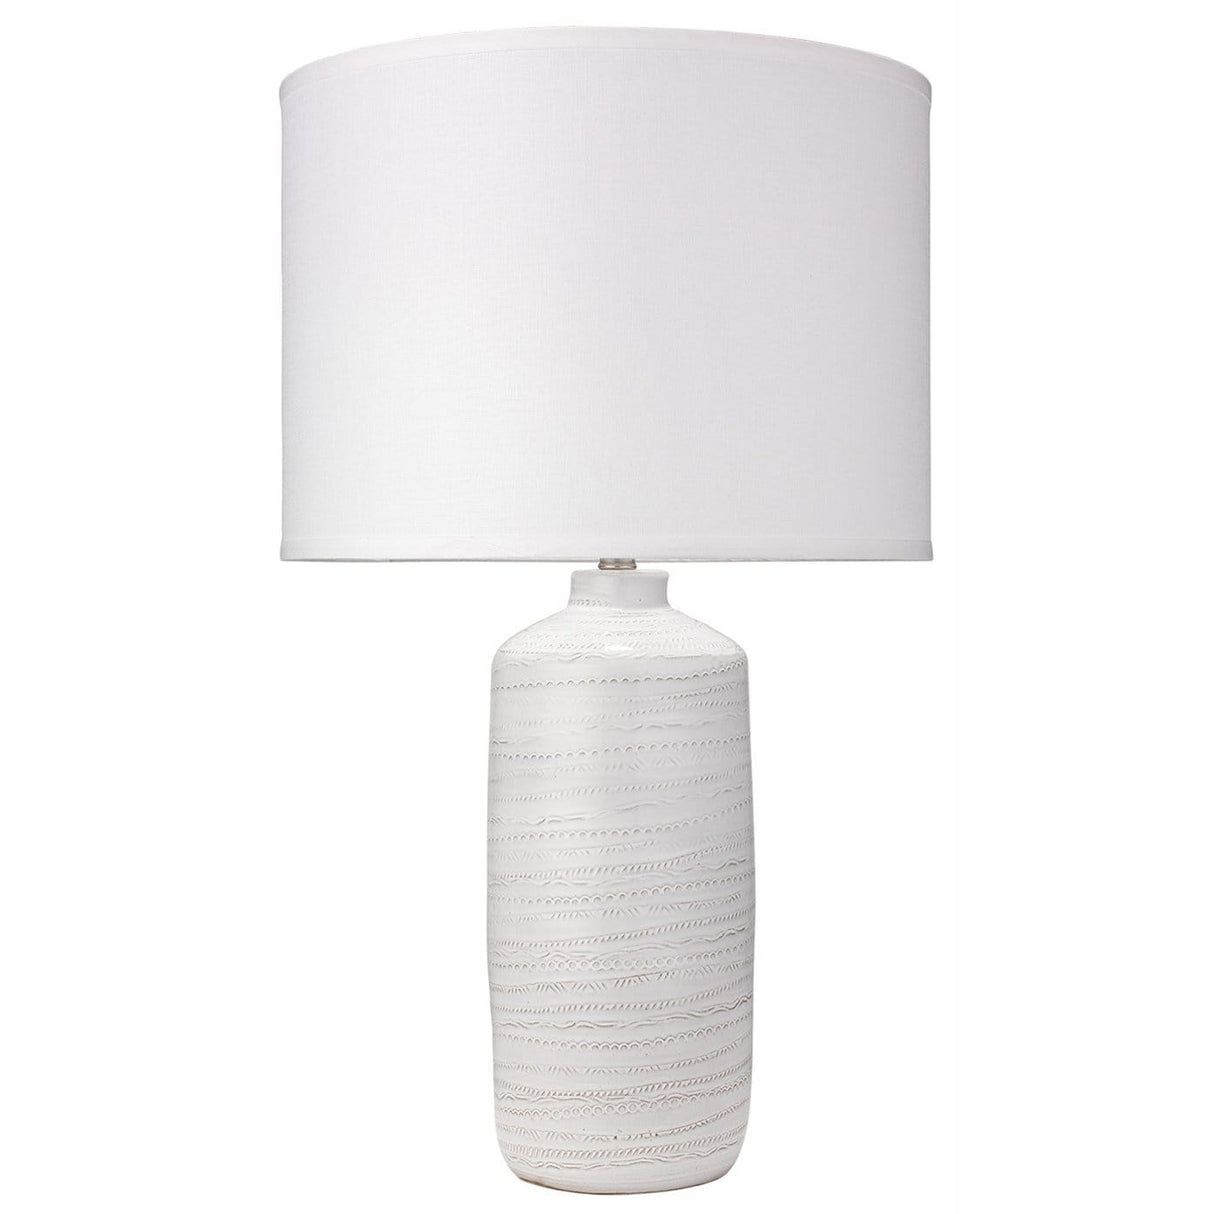 Jamie Young Trace Table Lamp Lighting jamie-young-9TRACWHD131L 00688933024579